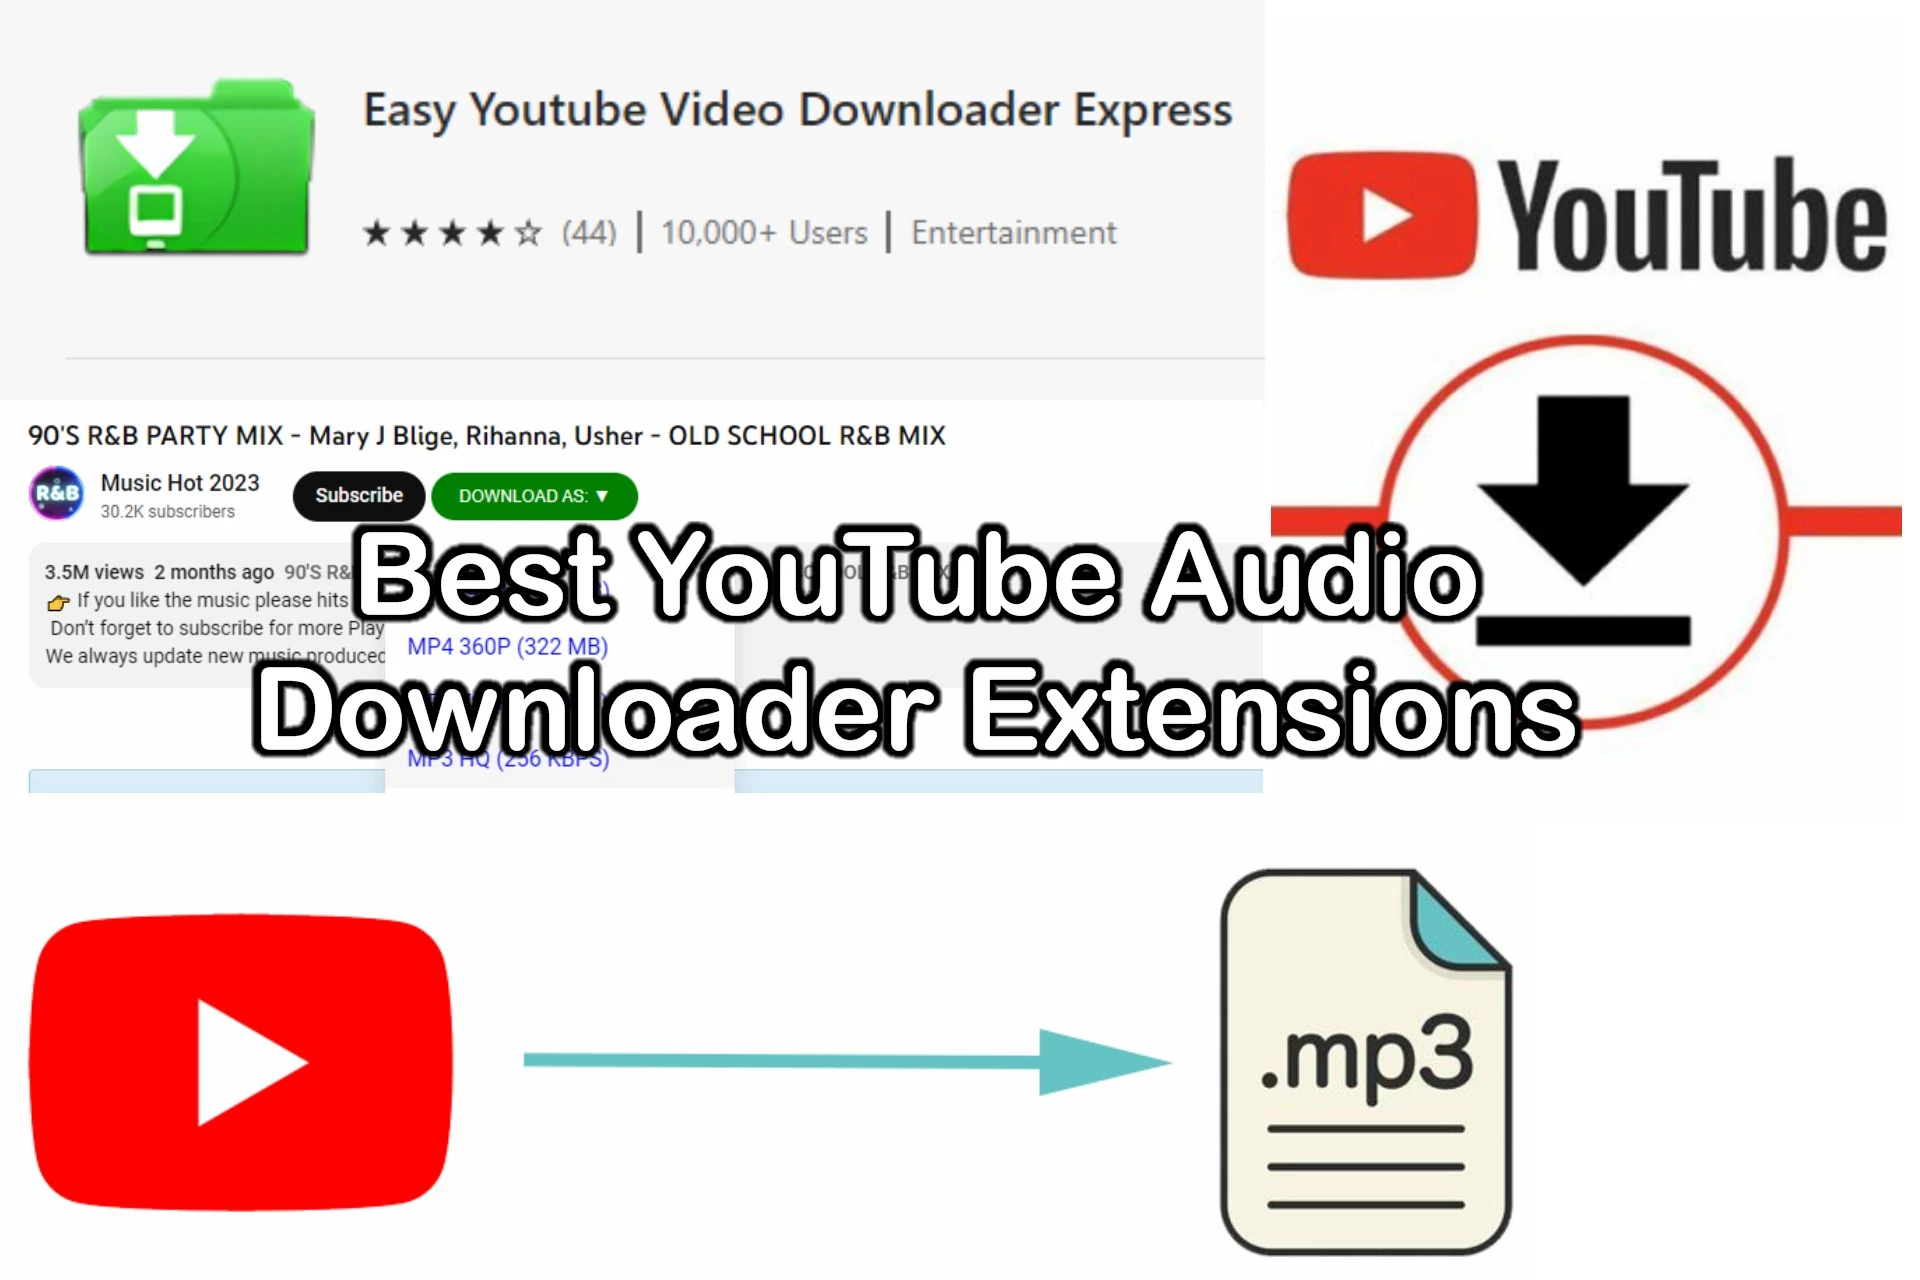 YouTube Audio Downloader Extension